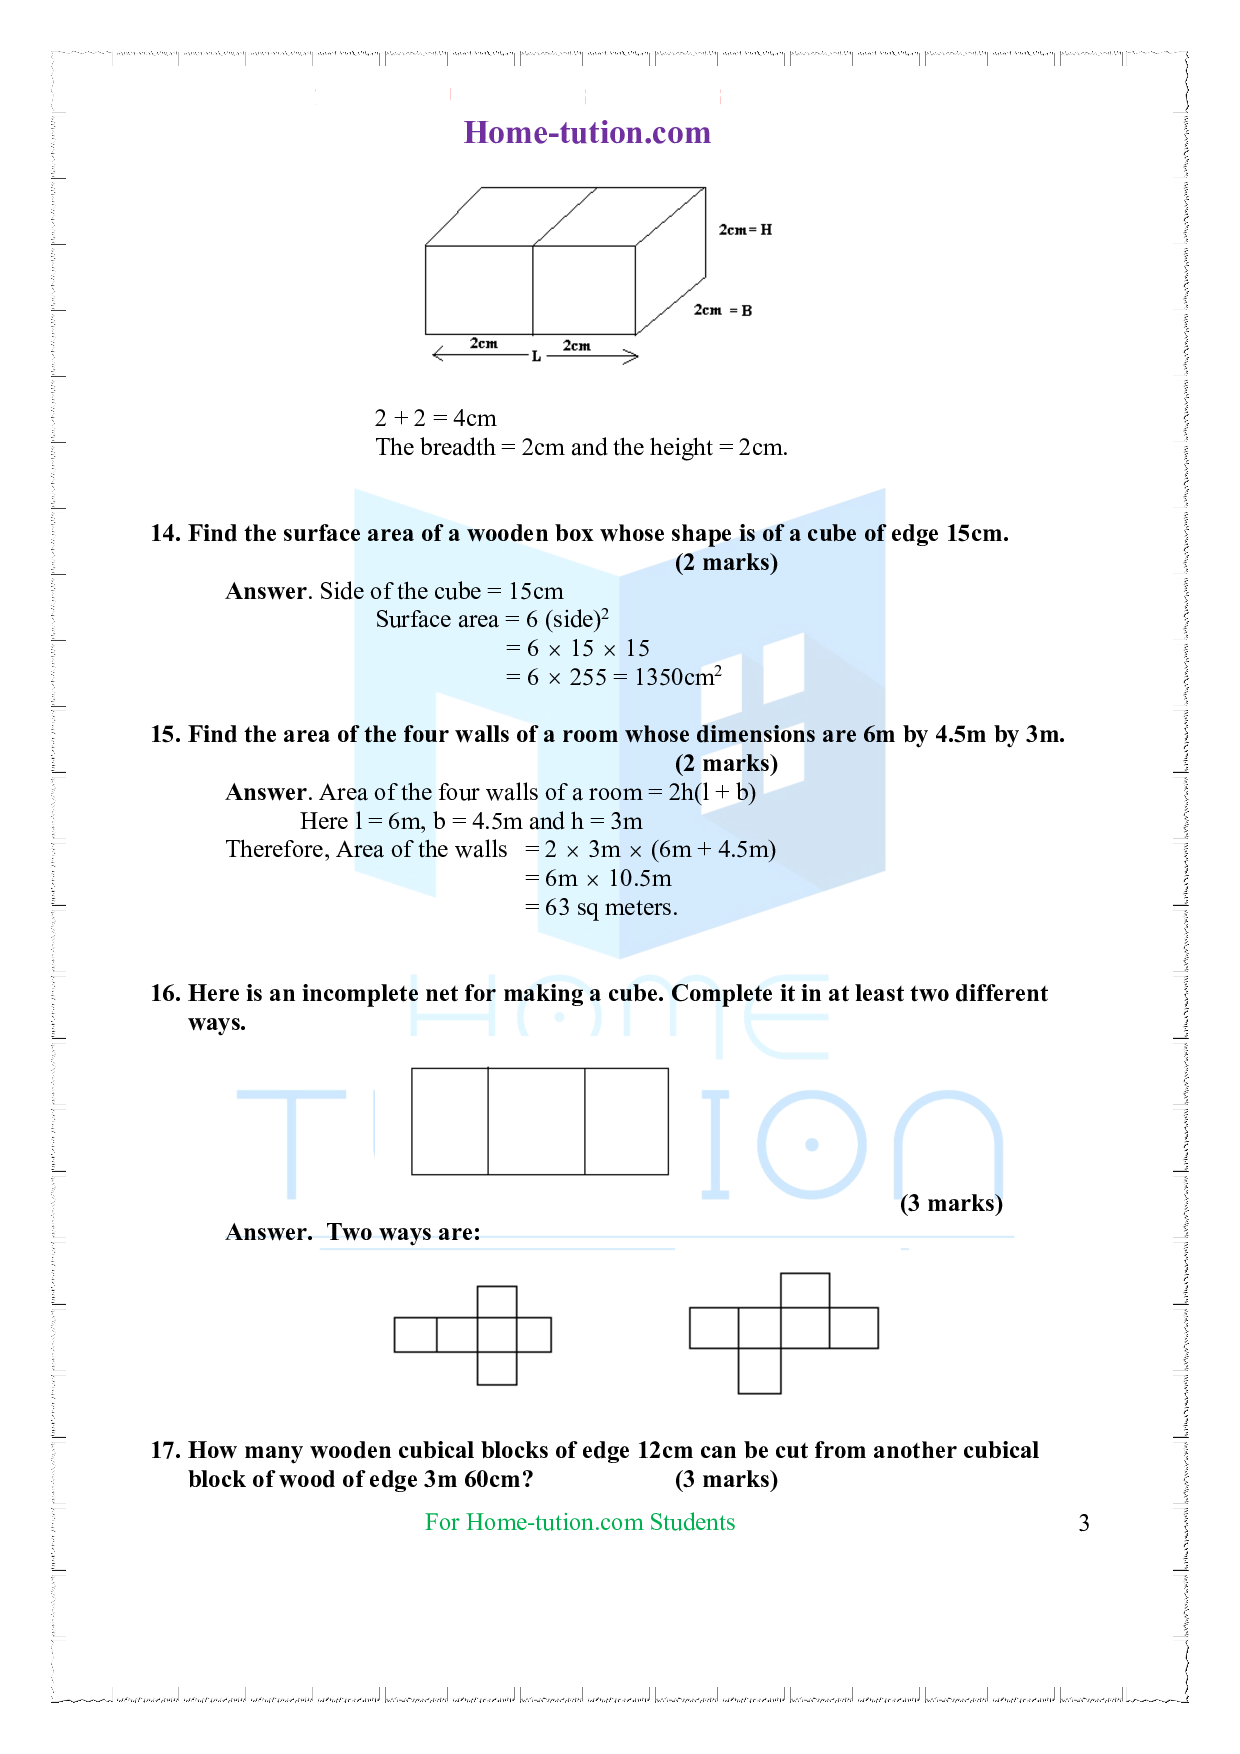 Extra Questions on Class 7 Maths Chapter 15 Visualising Solid Shapes